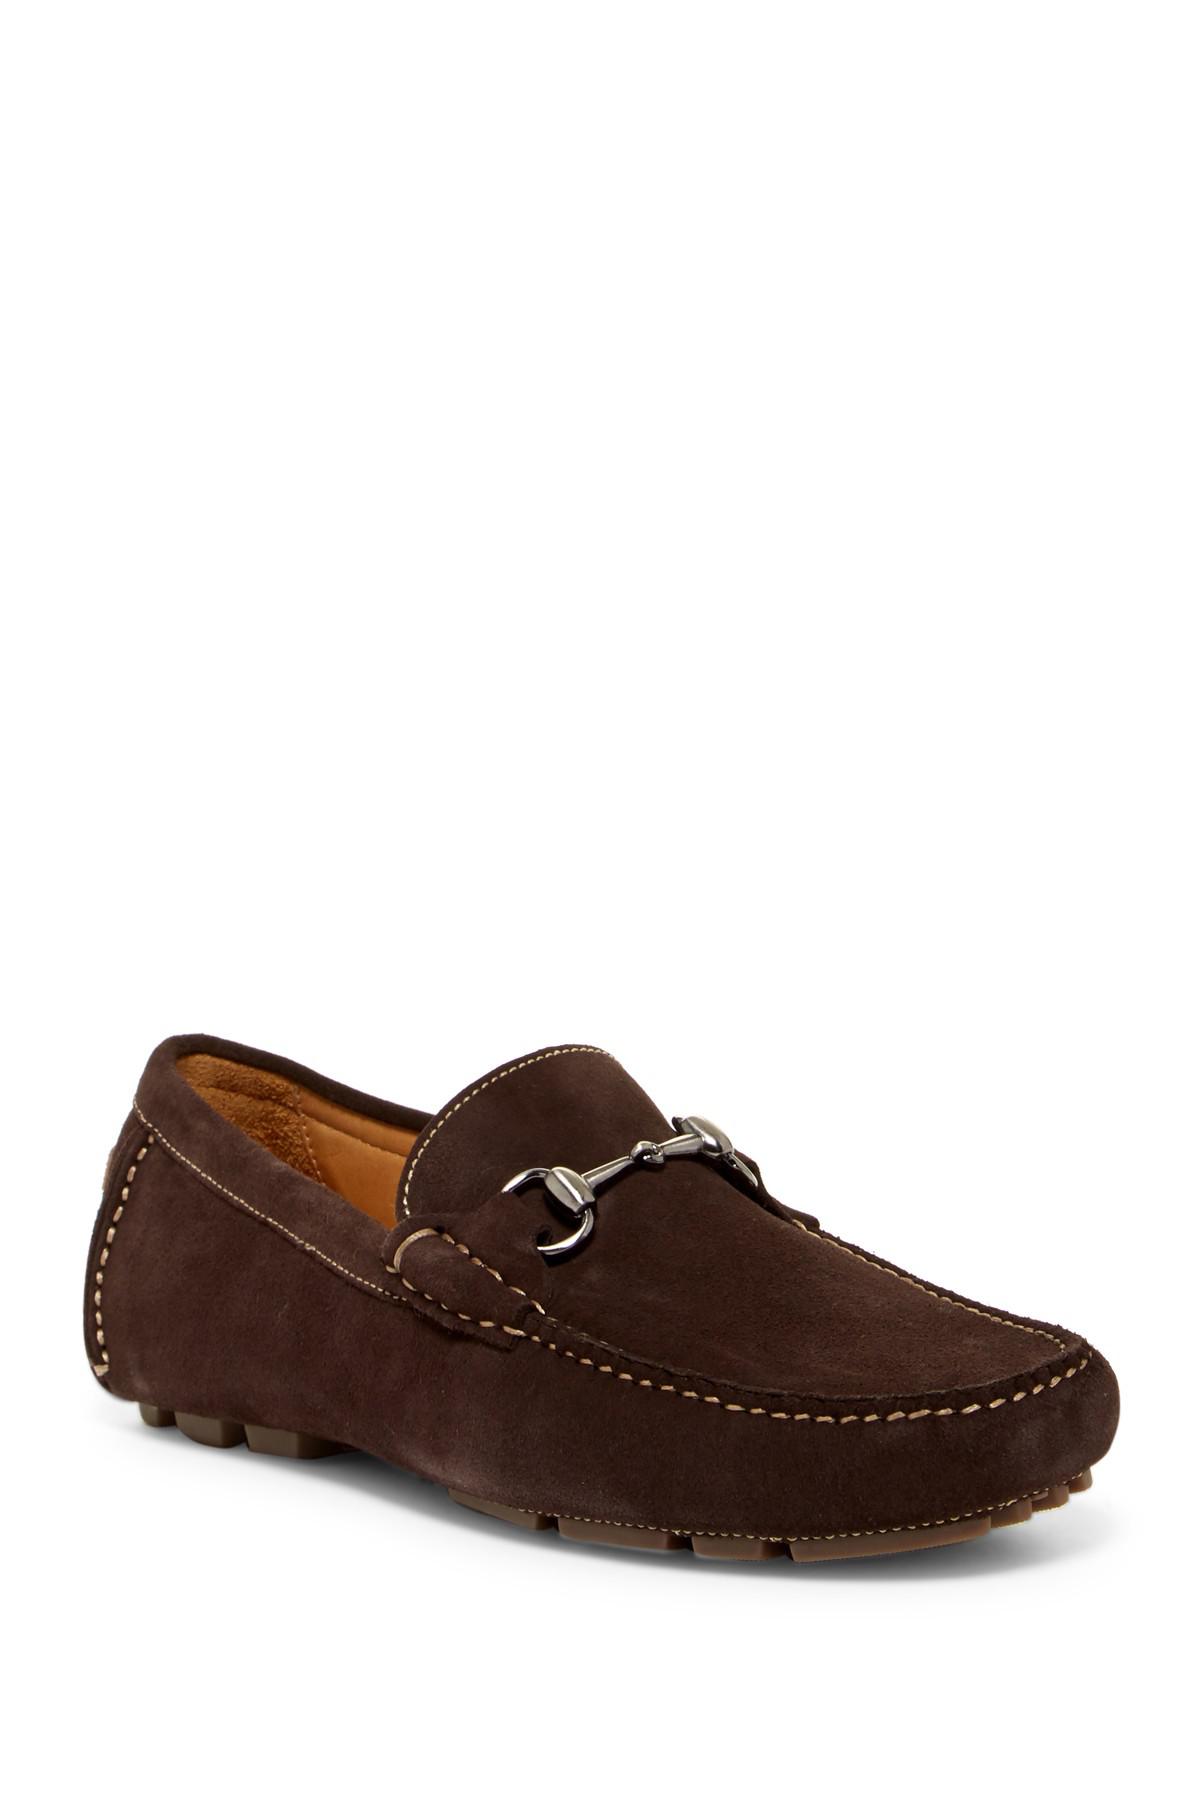 Peter Millar Manitou Suede Mocassin Driver in Brown for Men - Lyst